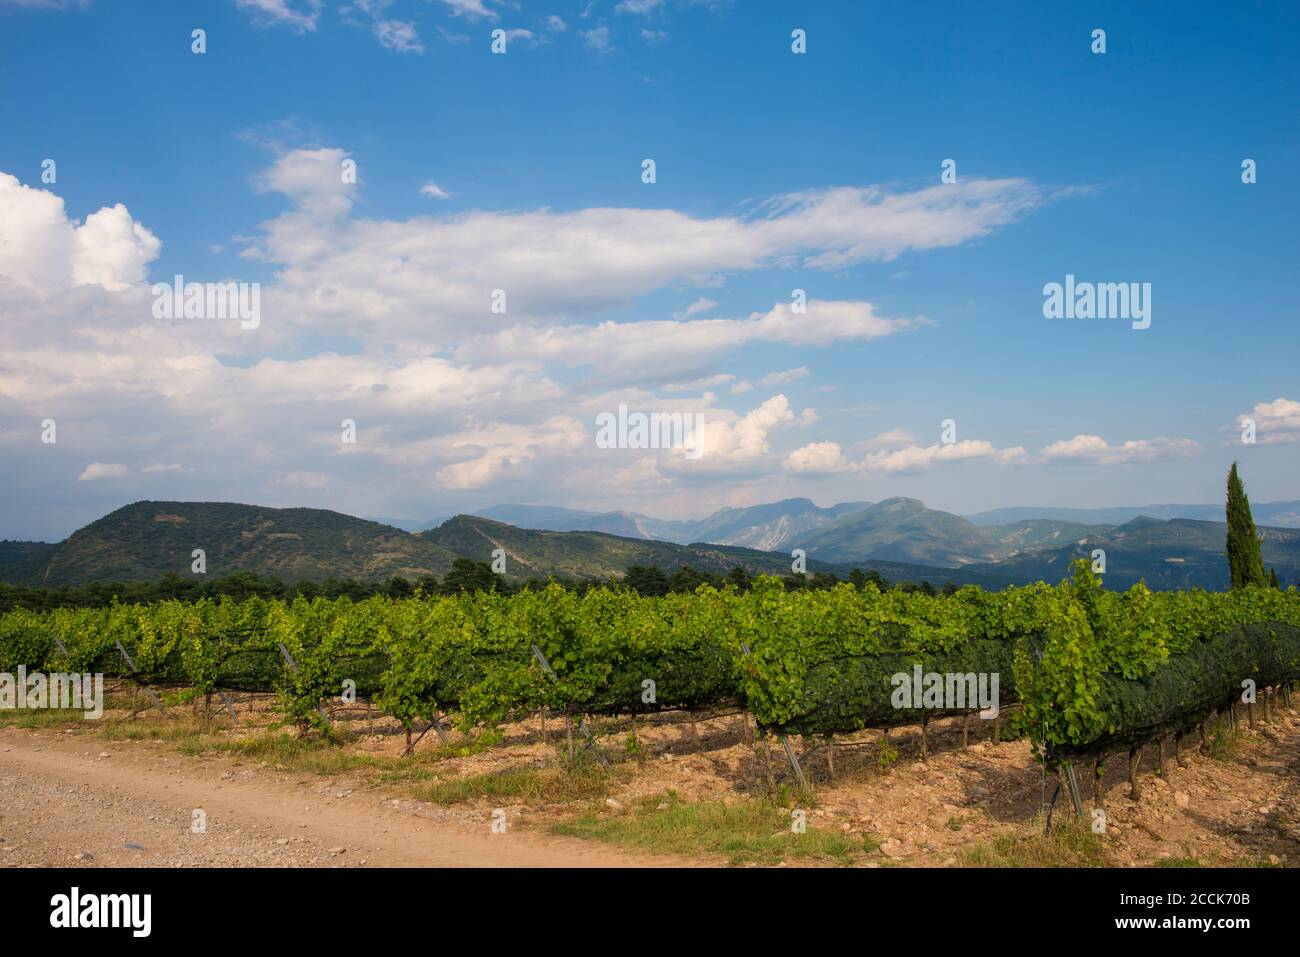 Spain, Catalonia, Clouds over countryside vineyard in summer Stock Photo